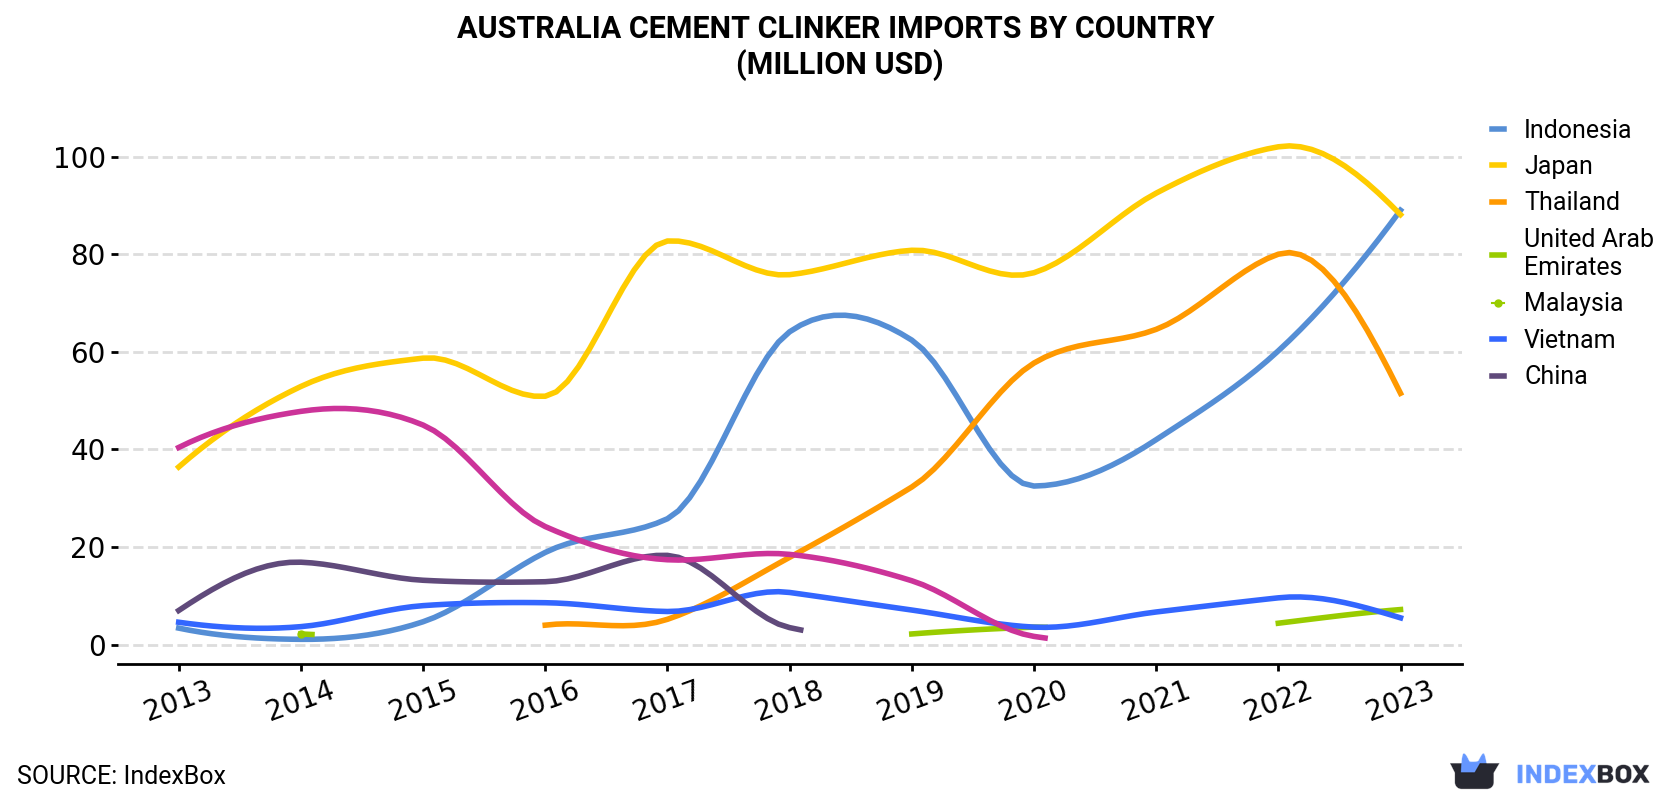 Australia Cement Clinker Imports By Country (Million USD)